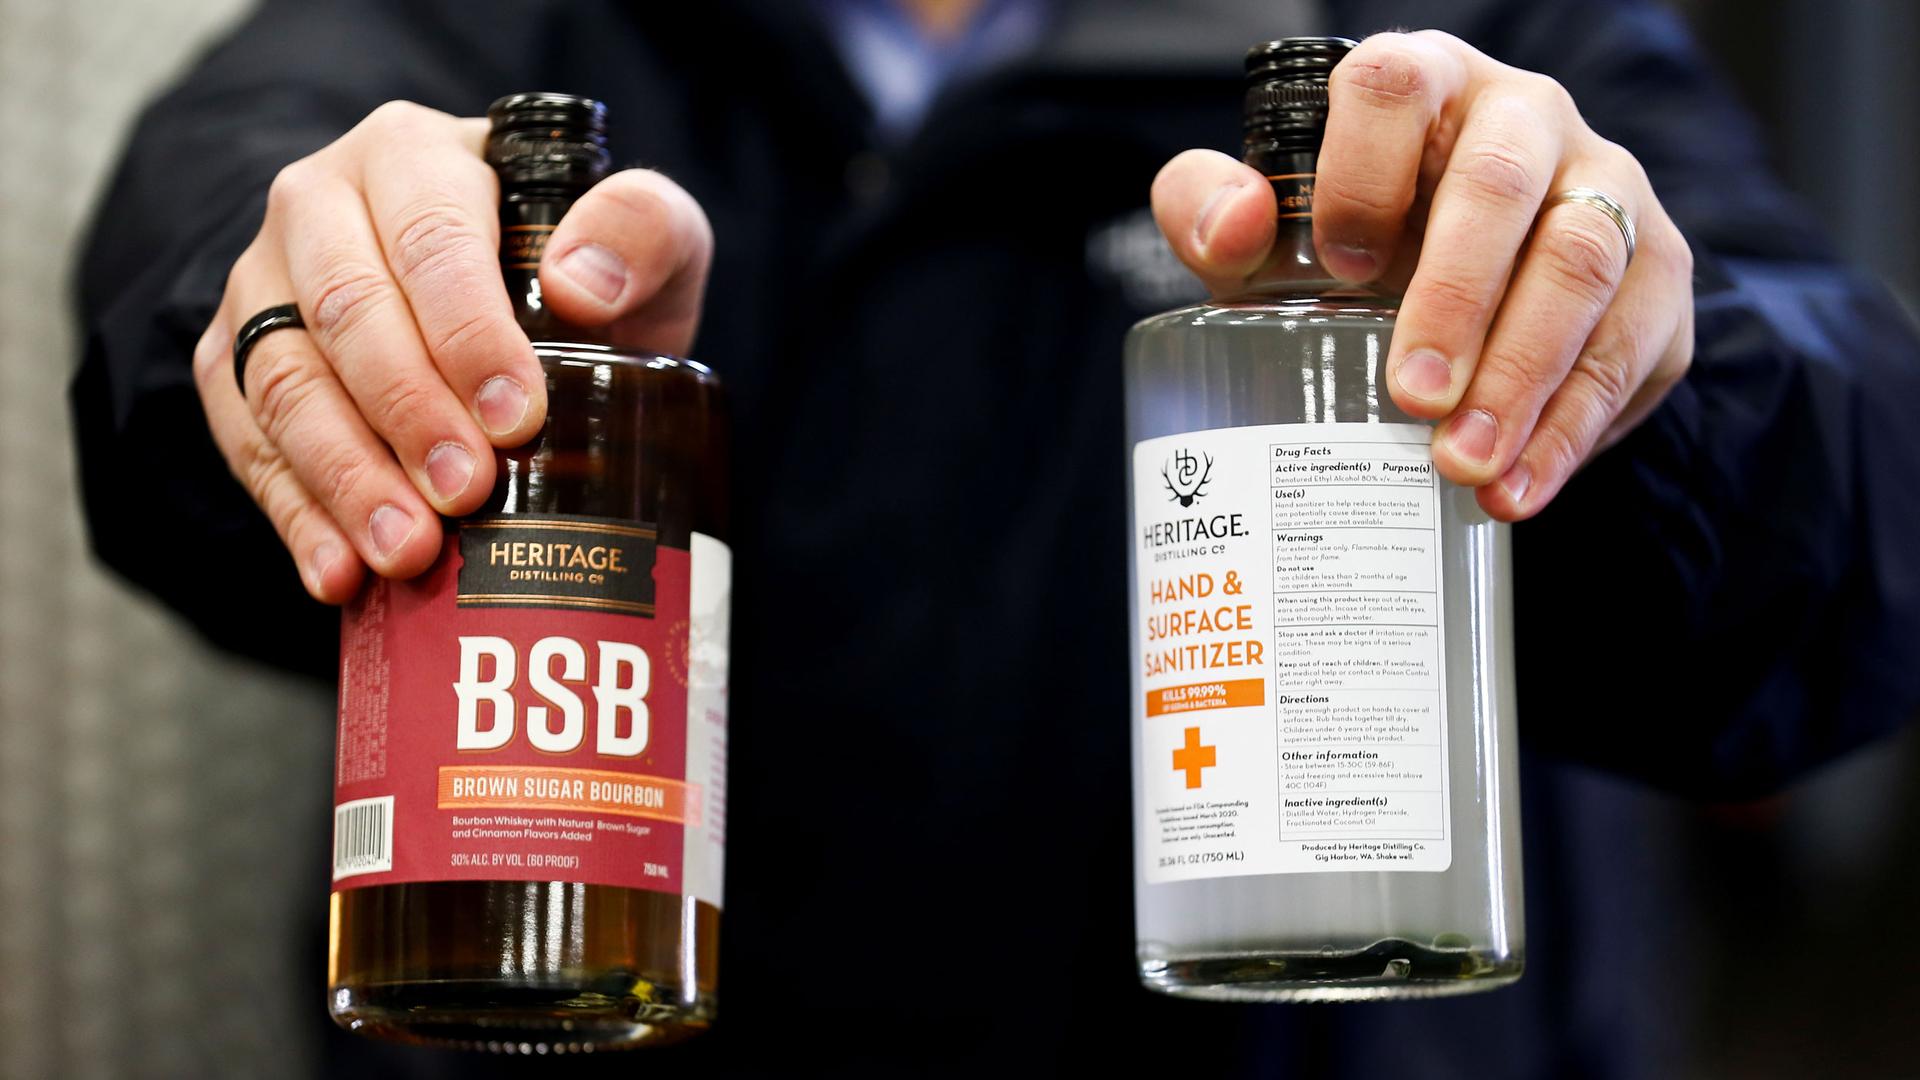 A close up of hands holding a bourbon bottle and a bottle of hand and surface sanitizer